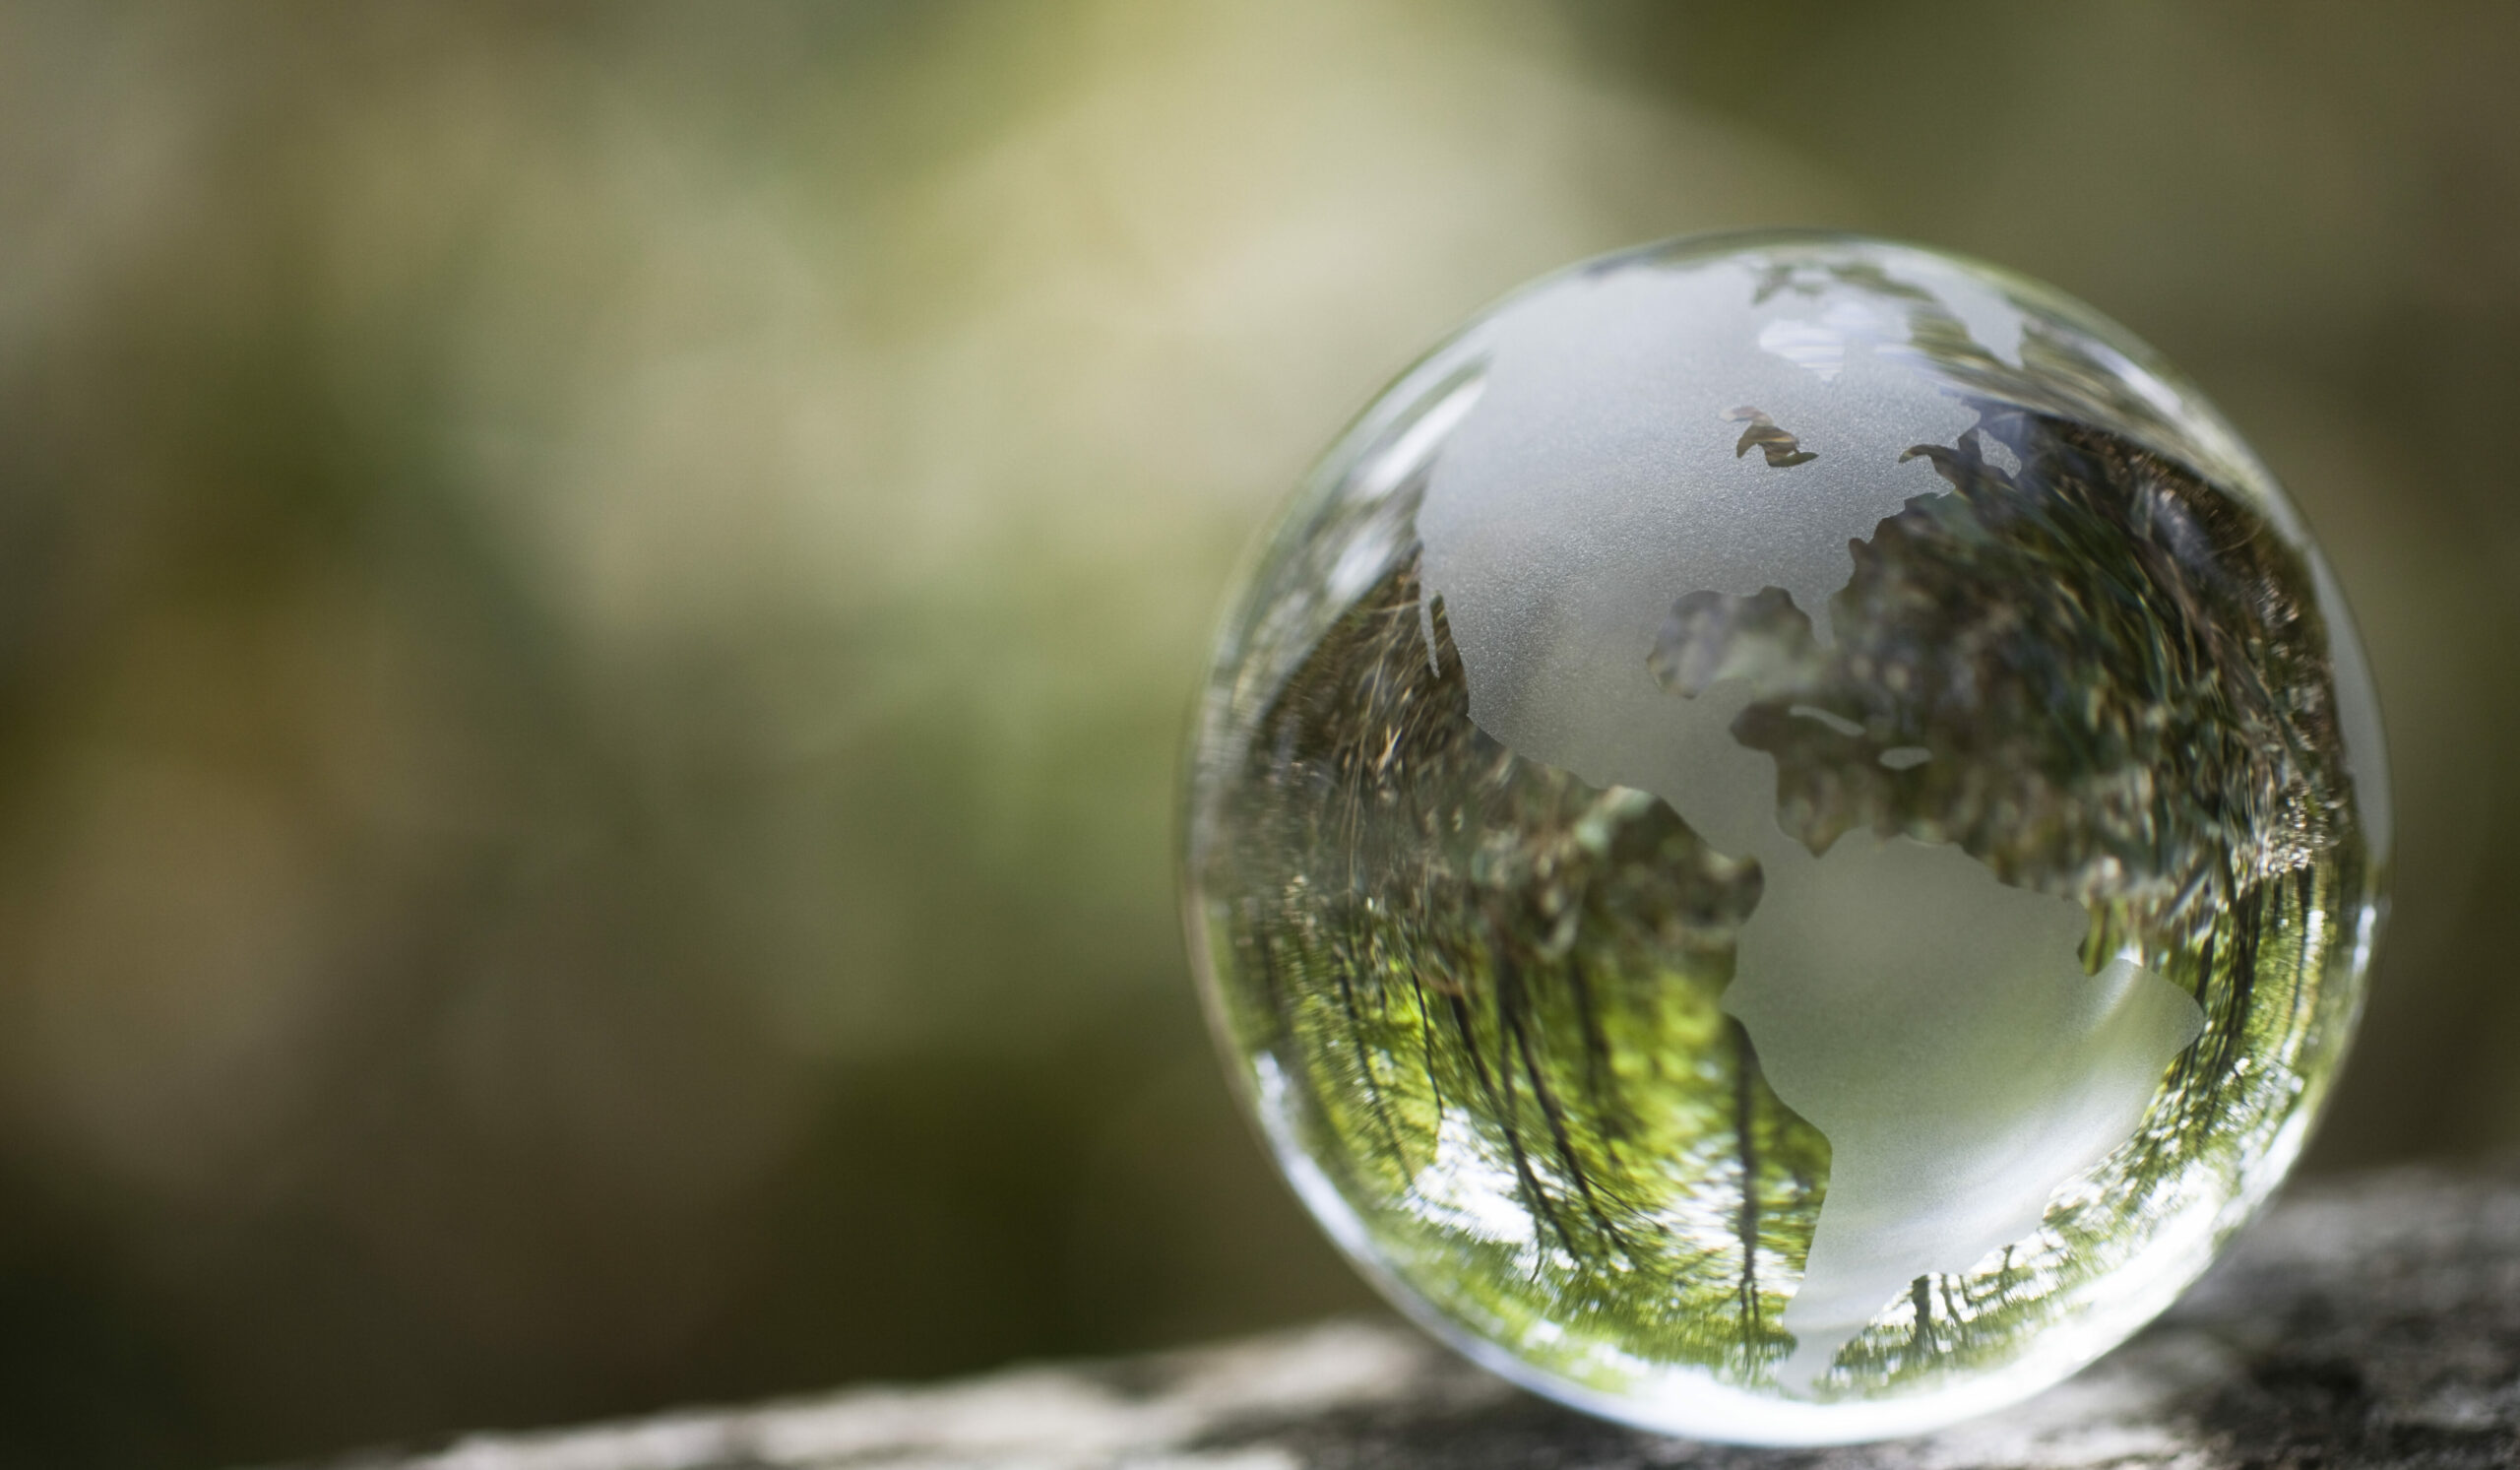 Forest reflected in a globe.